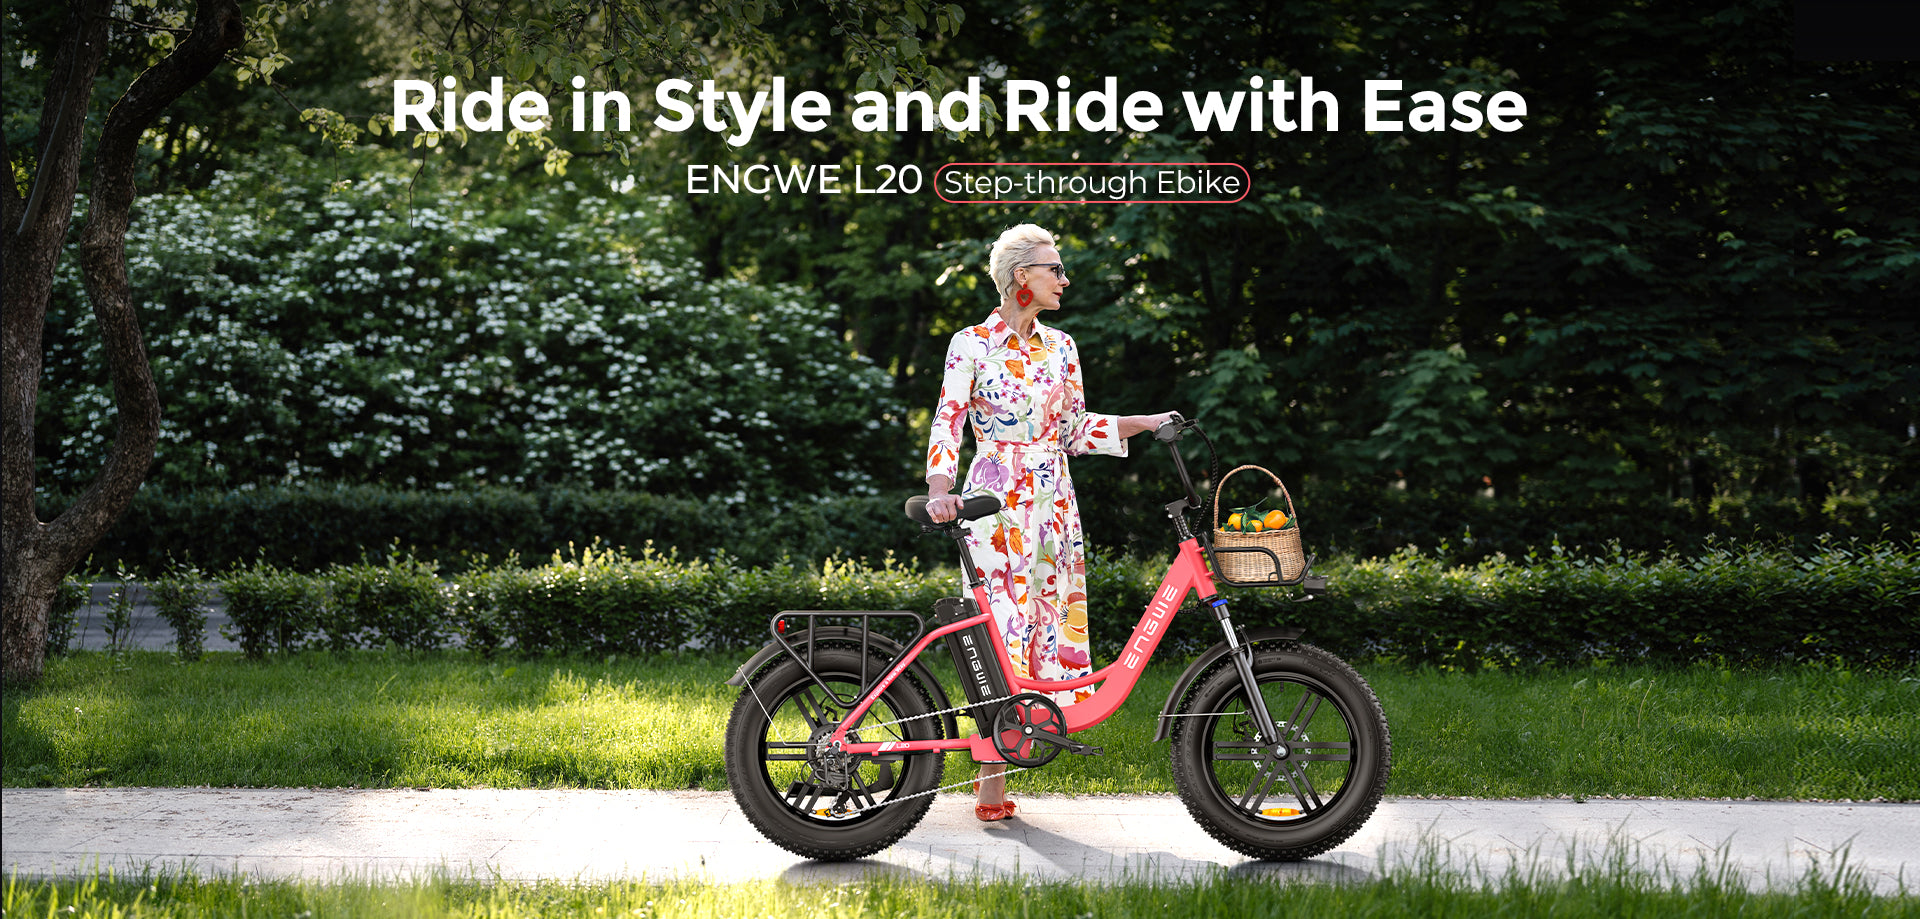 ENGWE L20 Electric Bike 20*4.0 inch Fat Tire 750W Motor 25MPH Max Speed 48V 13Ah Battery 90Miles Range Max Load 120kg Shimano 7-Speed Transmission